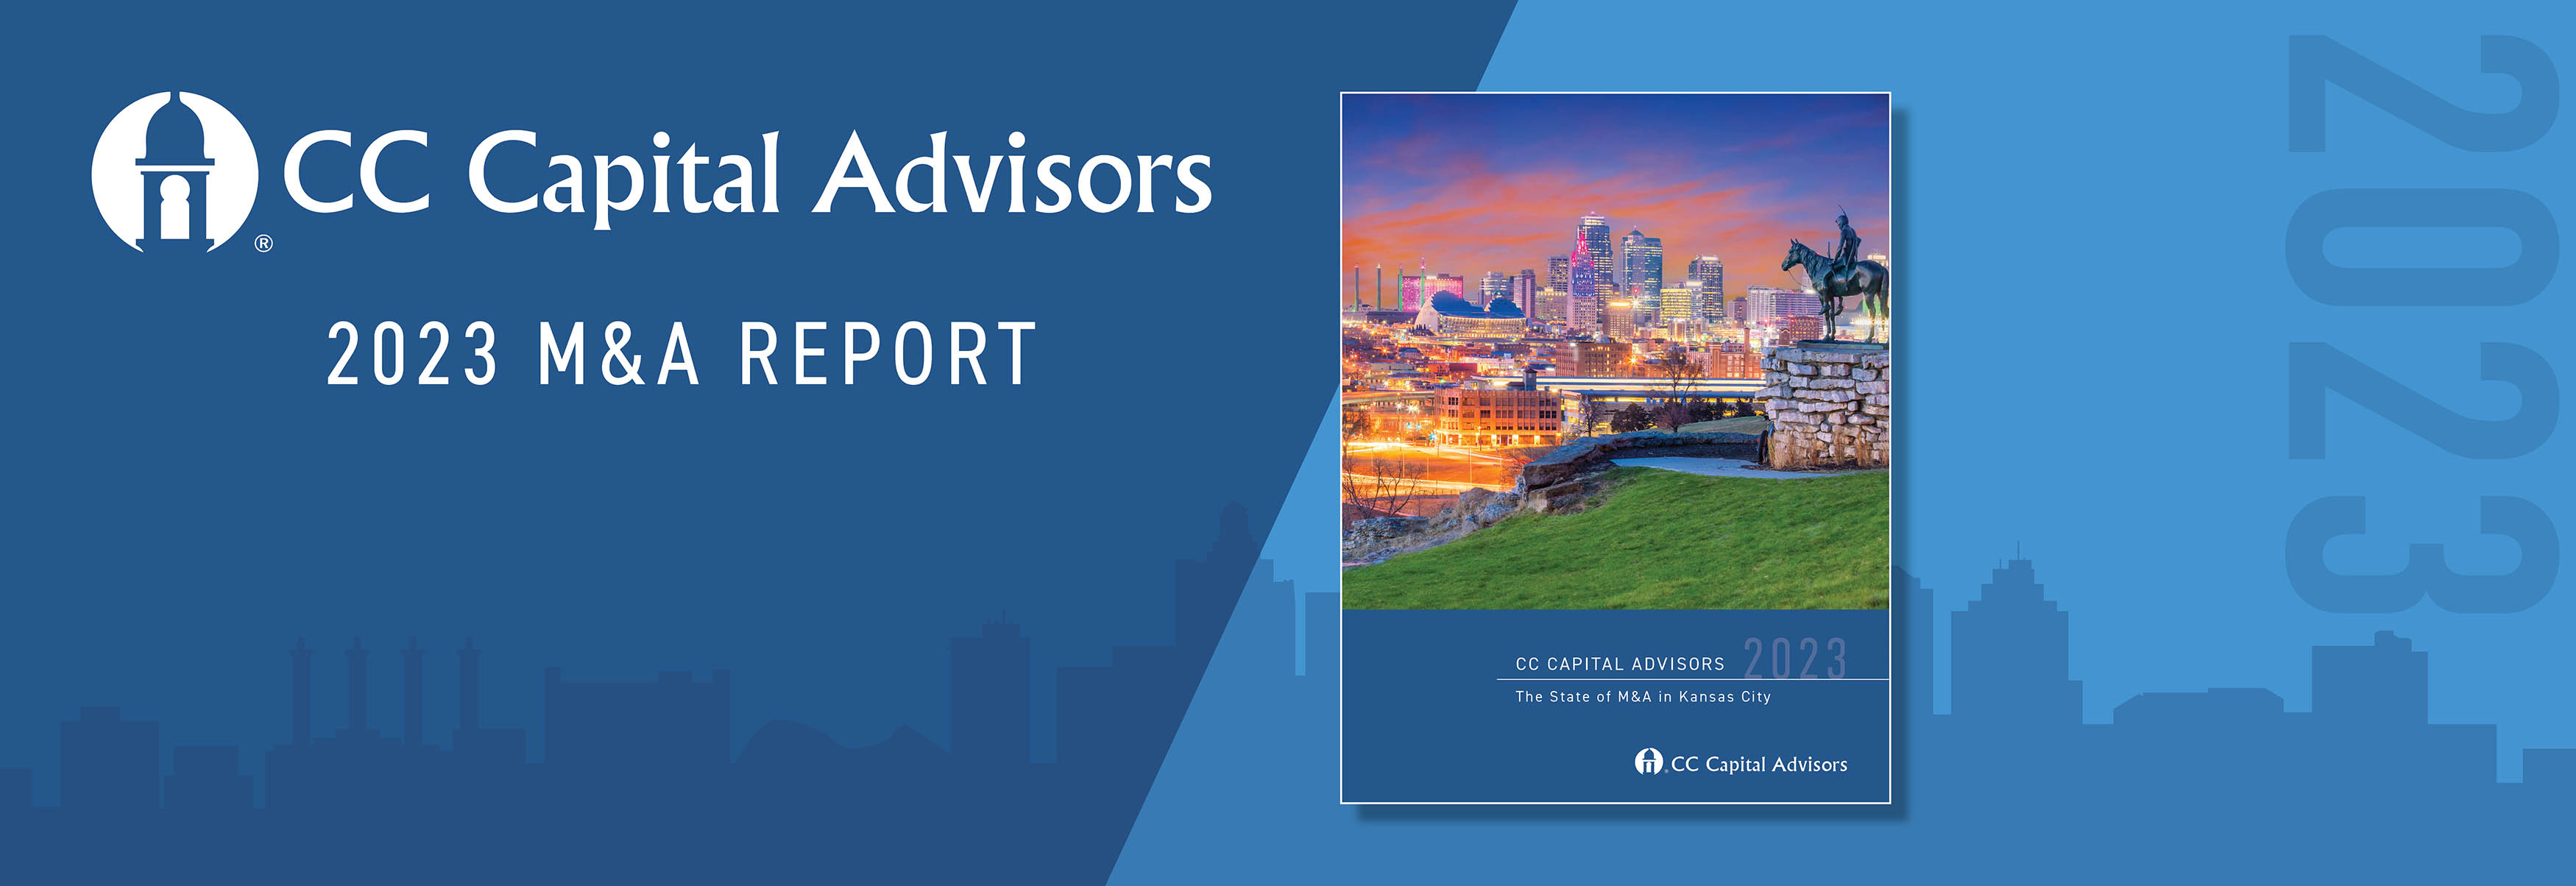 2023 State of M&A in Kansas City banner image